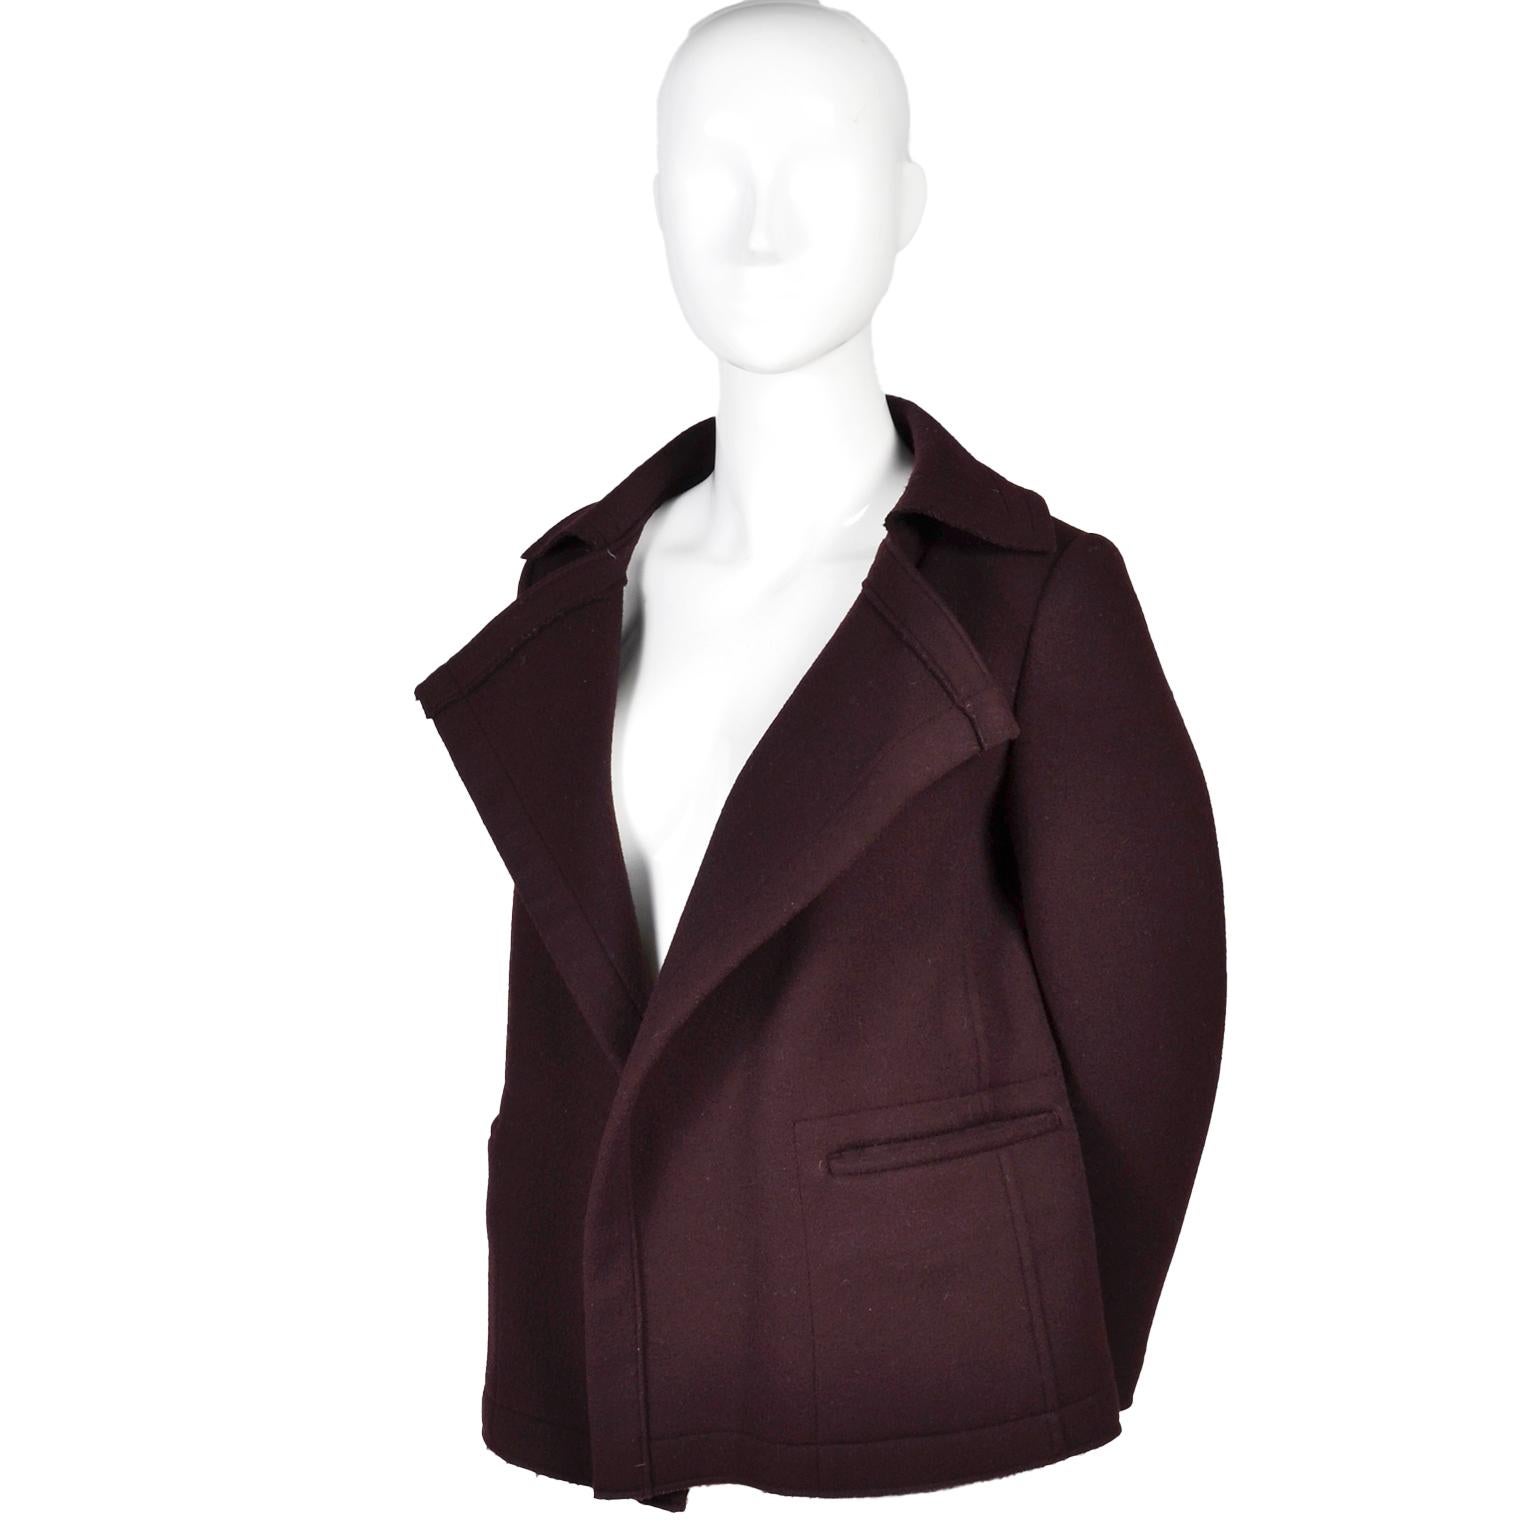 This is a great Yohji Yamamoto deep plum purple wool blend vintage jacket. This is an open front blazer with no buttons or fasteners. There are two pockets at the waist and raw hems. This great piece was made in Japan in the early 1990's and fits a